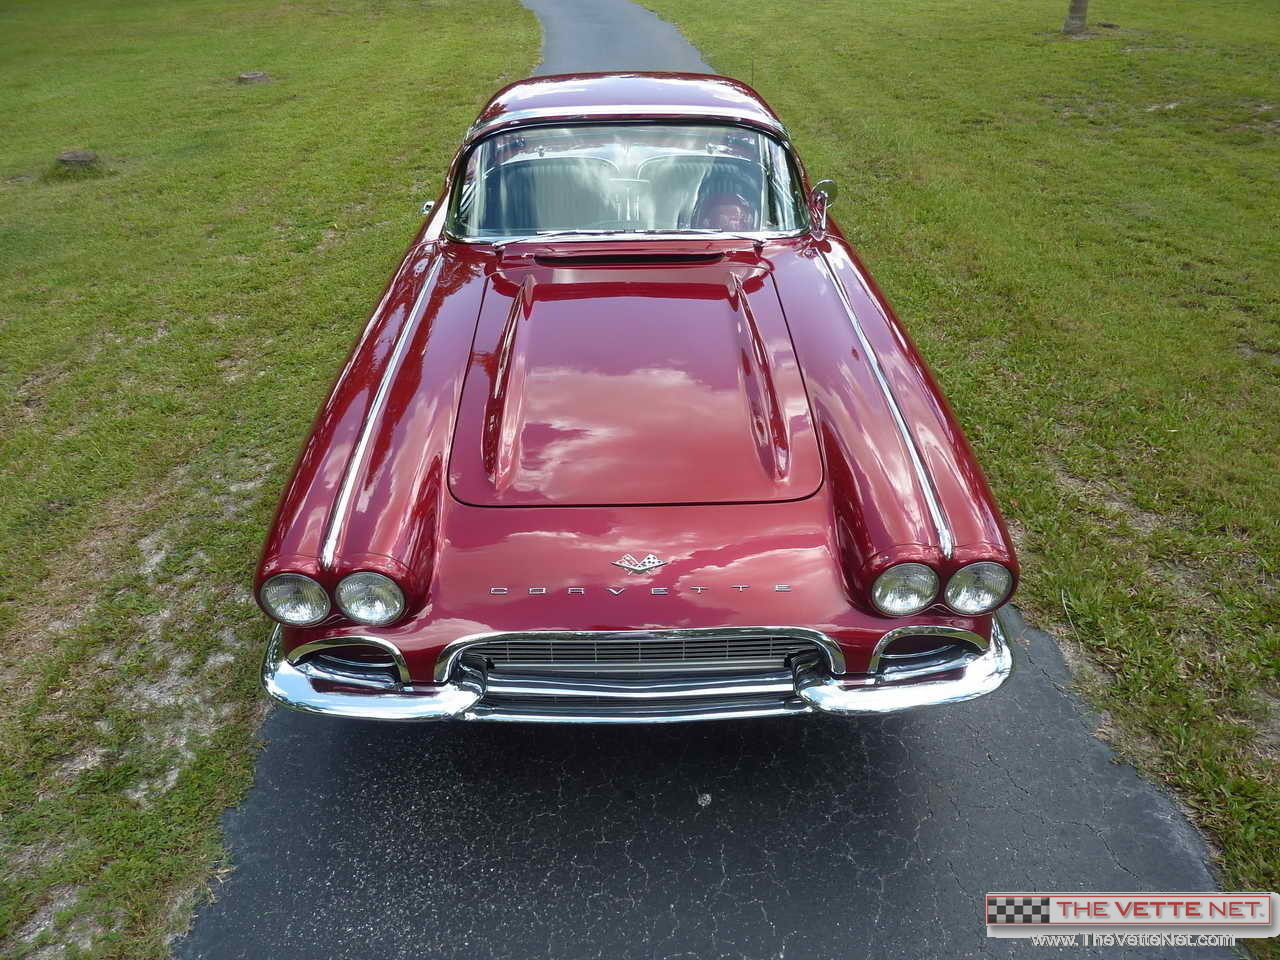 1961 Corvette Convertible Candy Apple Red